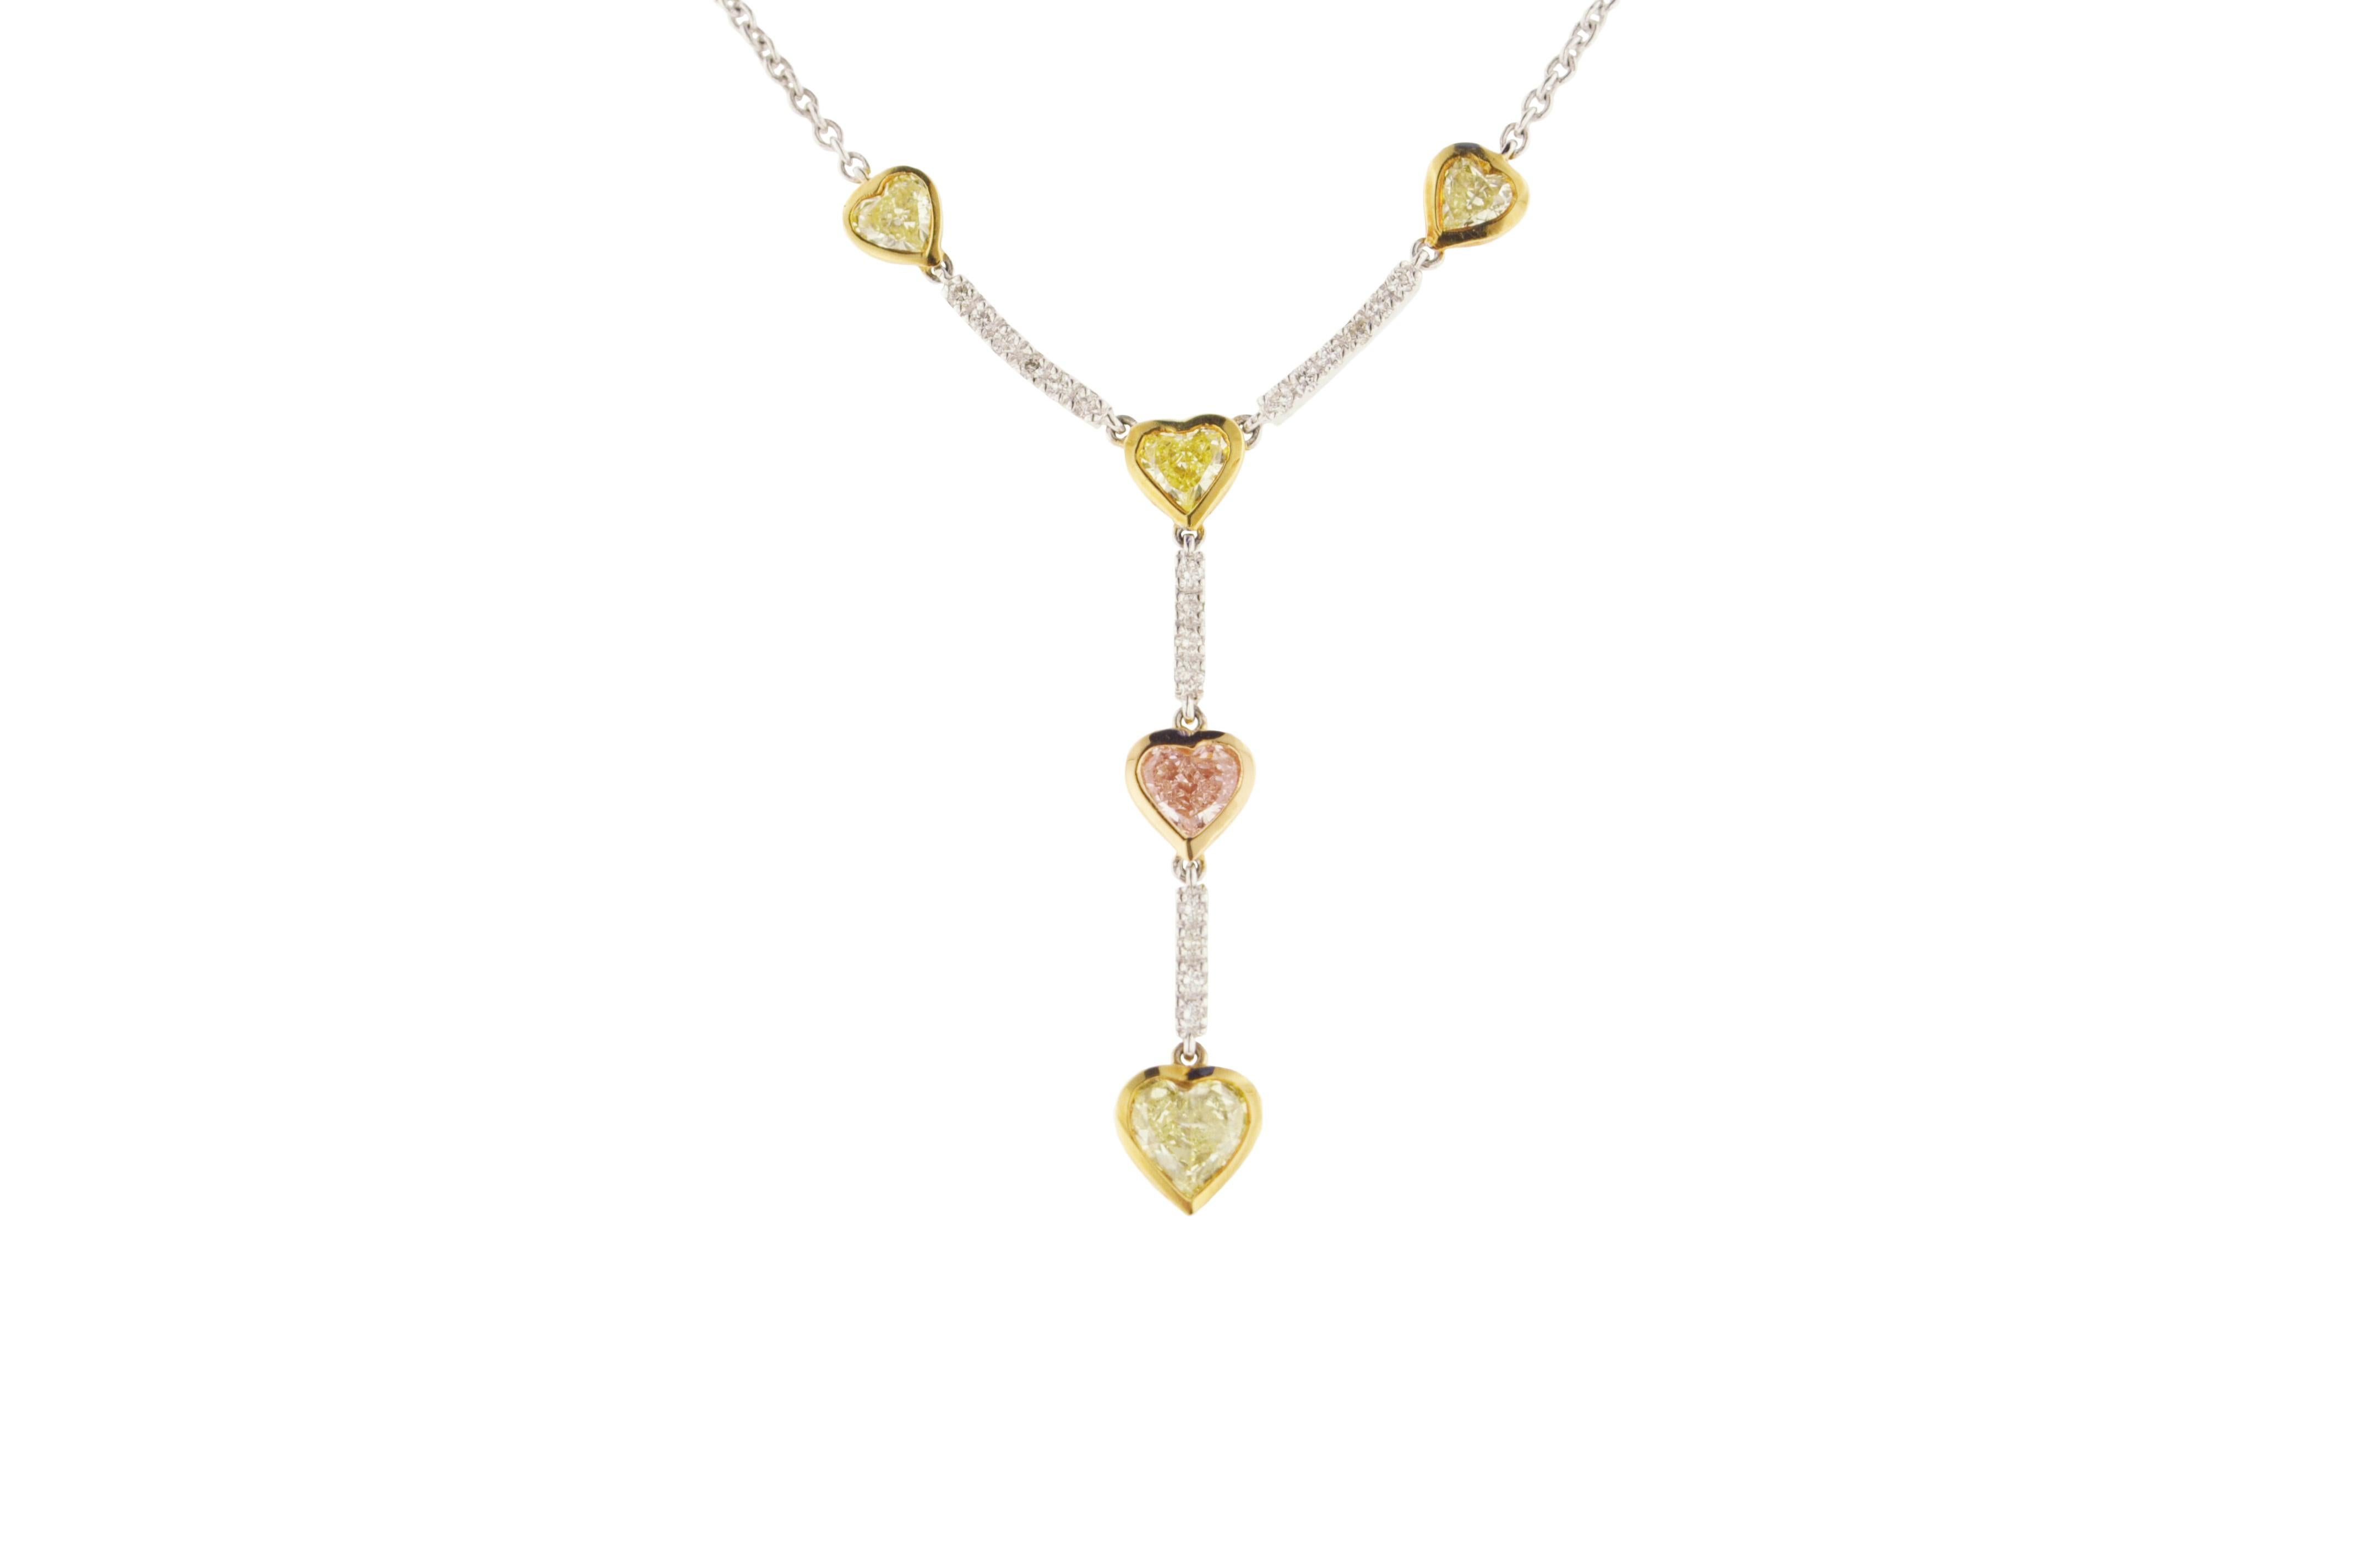 18K white and yellow gold pendant featuring four heart shape light yellow diamonds and one heart shape light pink diamond.

Diamonds:
4 Light Yellow Diamonds: 1.80 carats
1 Light Pink Diamond: 0.47 carats